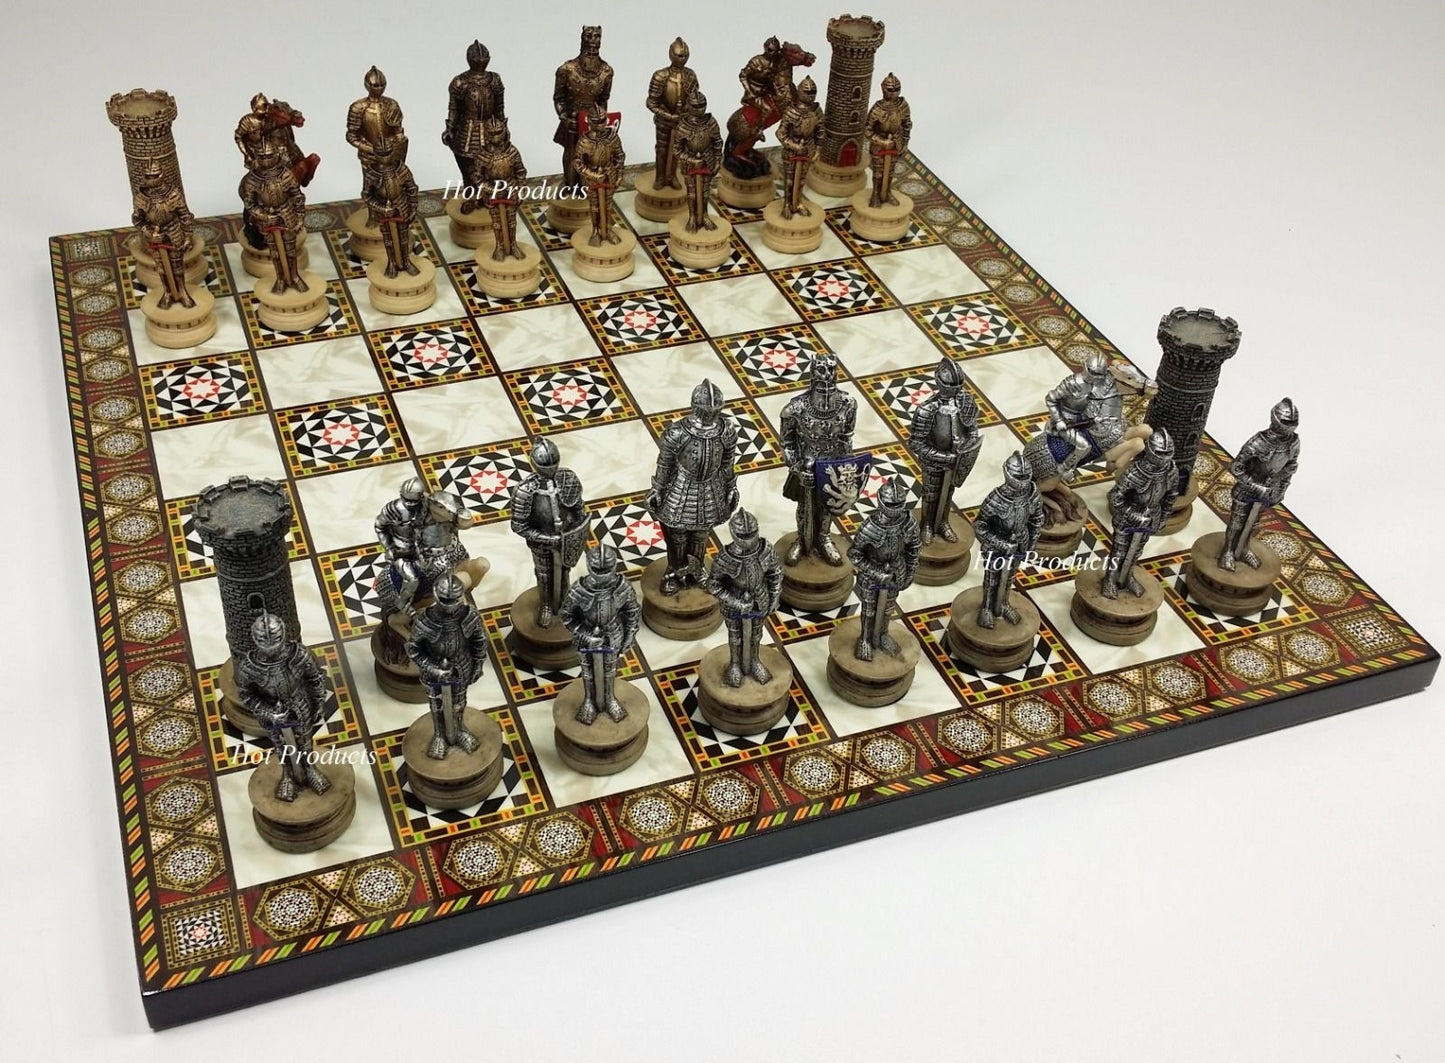 Medieval Times Crusades Armored Warrior Knight Chess Set 14' Mosaic Color Board